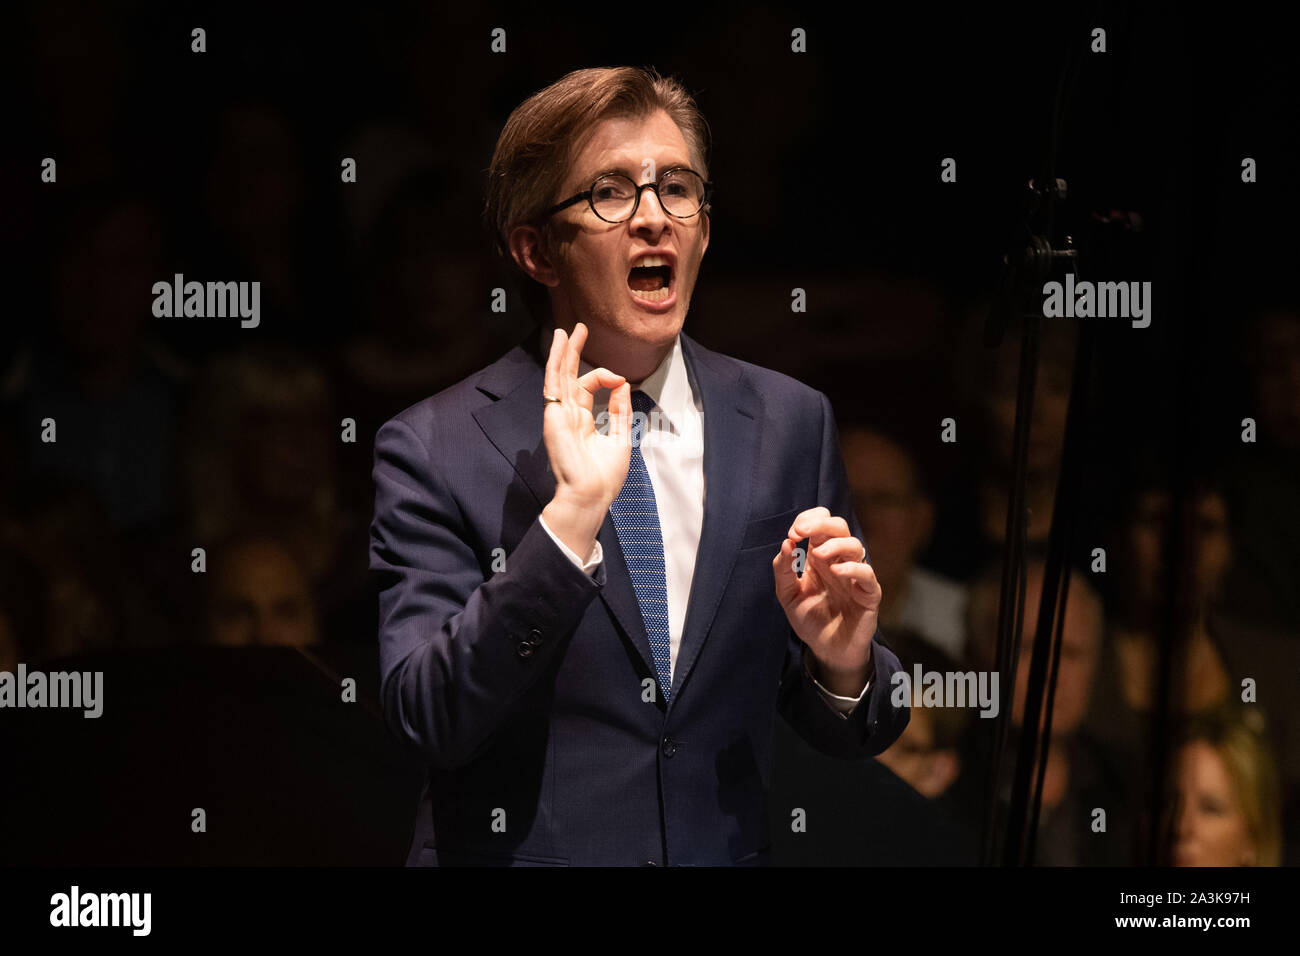 Gareth Malone conducts the Bournemouth Symphony Orchestra at Classic FM Live at London's Royal Albert Hall. Stock Photo